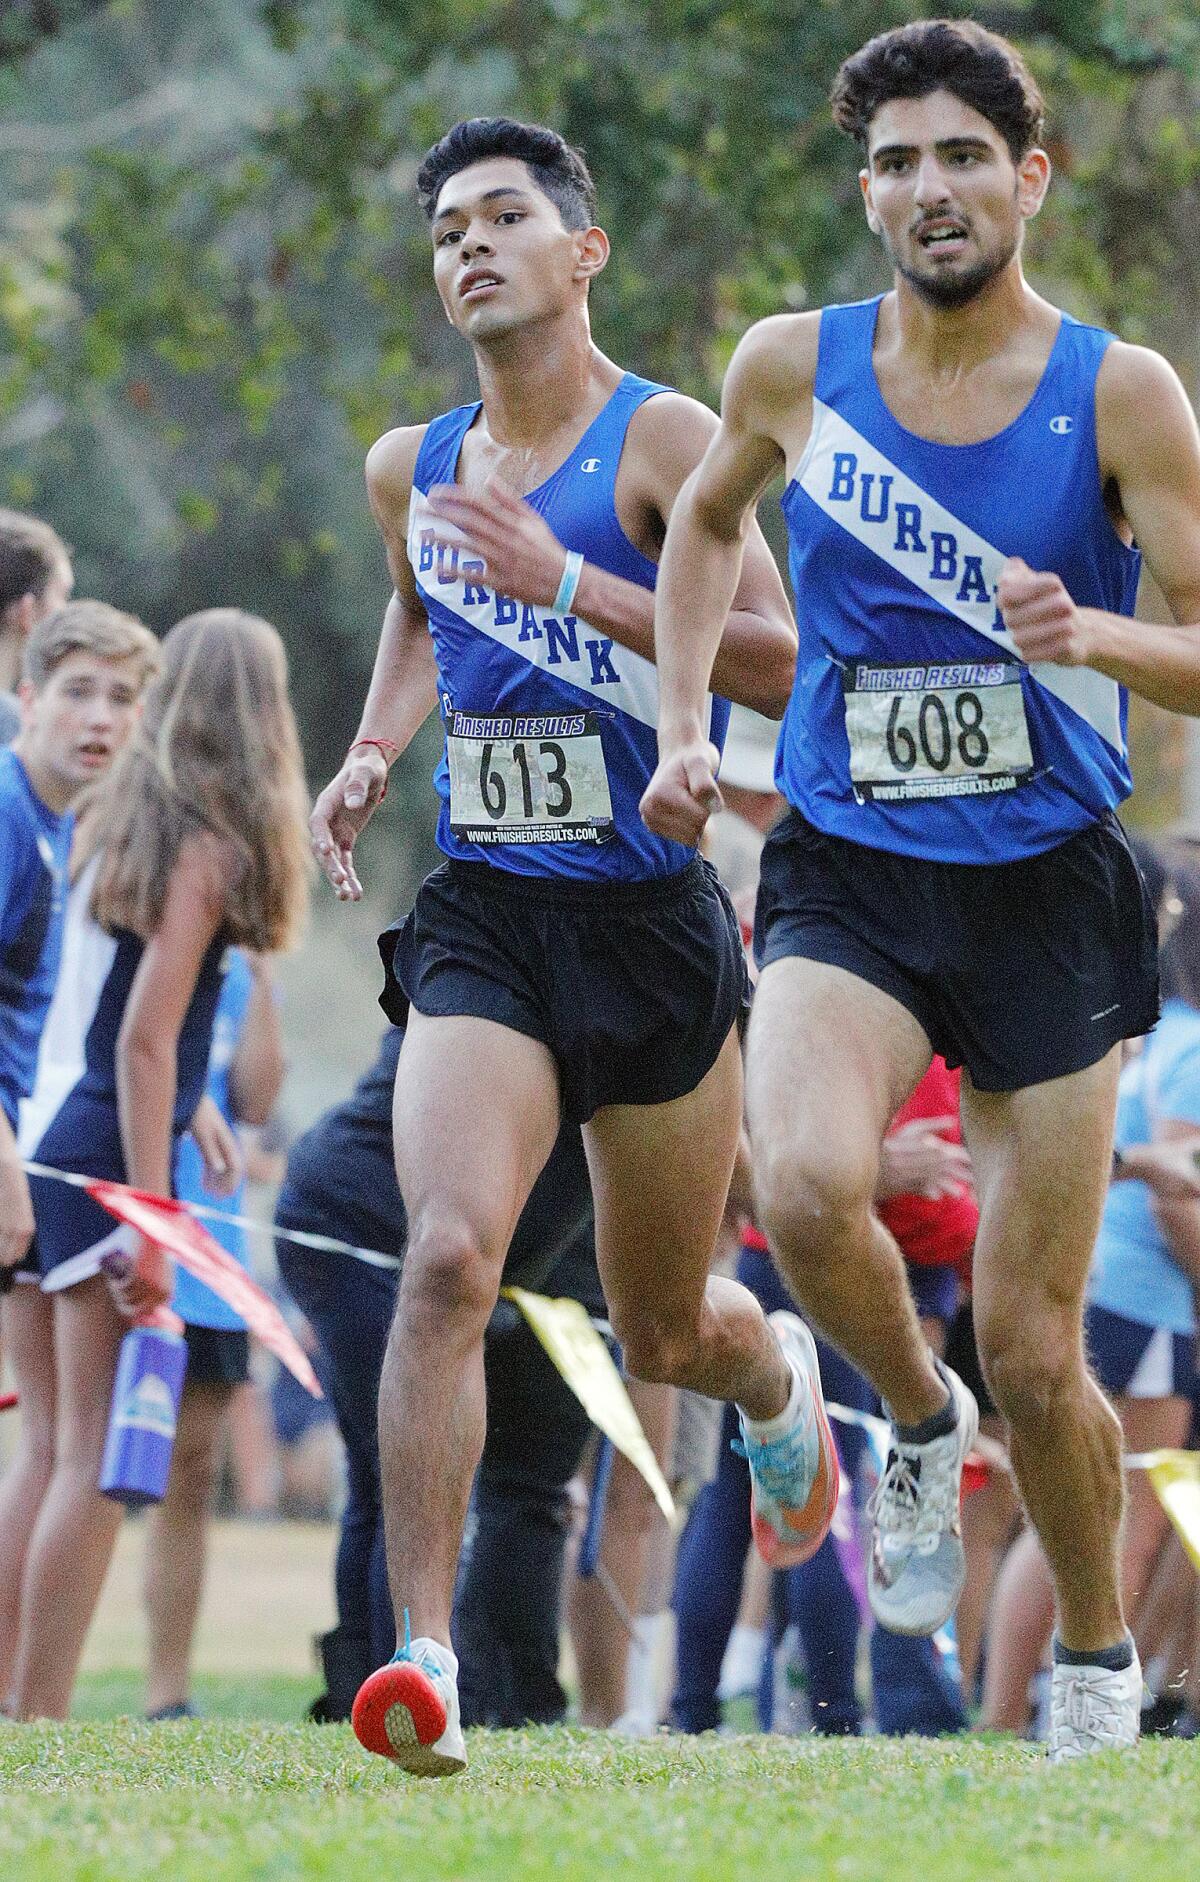 The Burbank High boys' cross-country team took part in the CIF Southern Section Division I prelims Friday in Riverside.